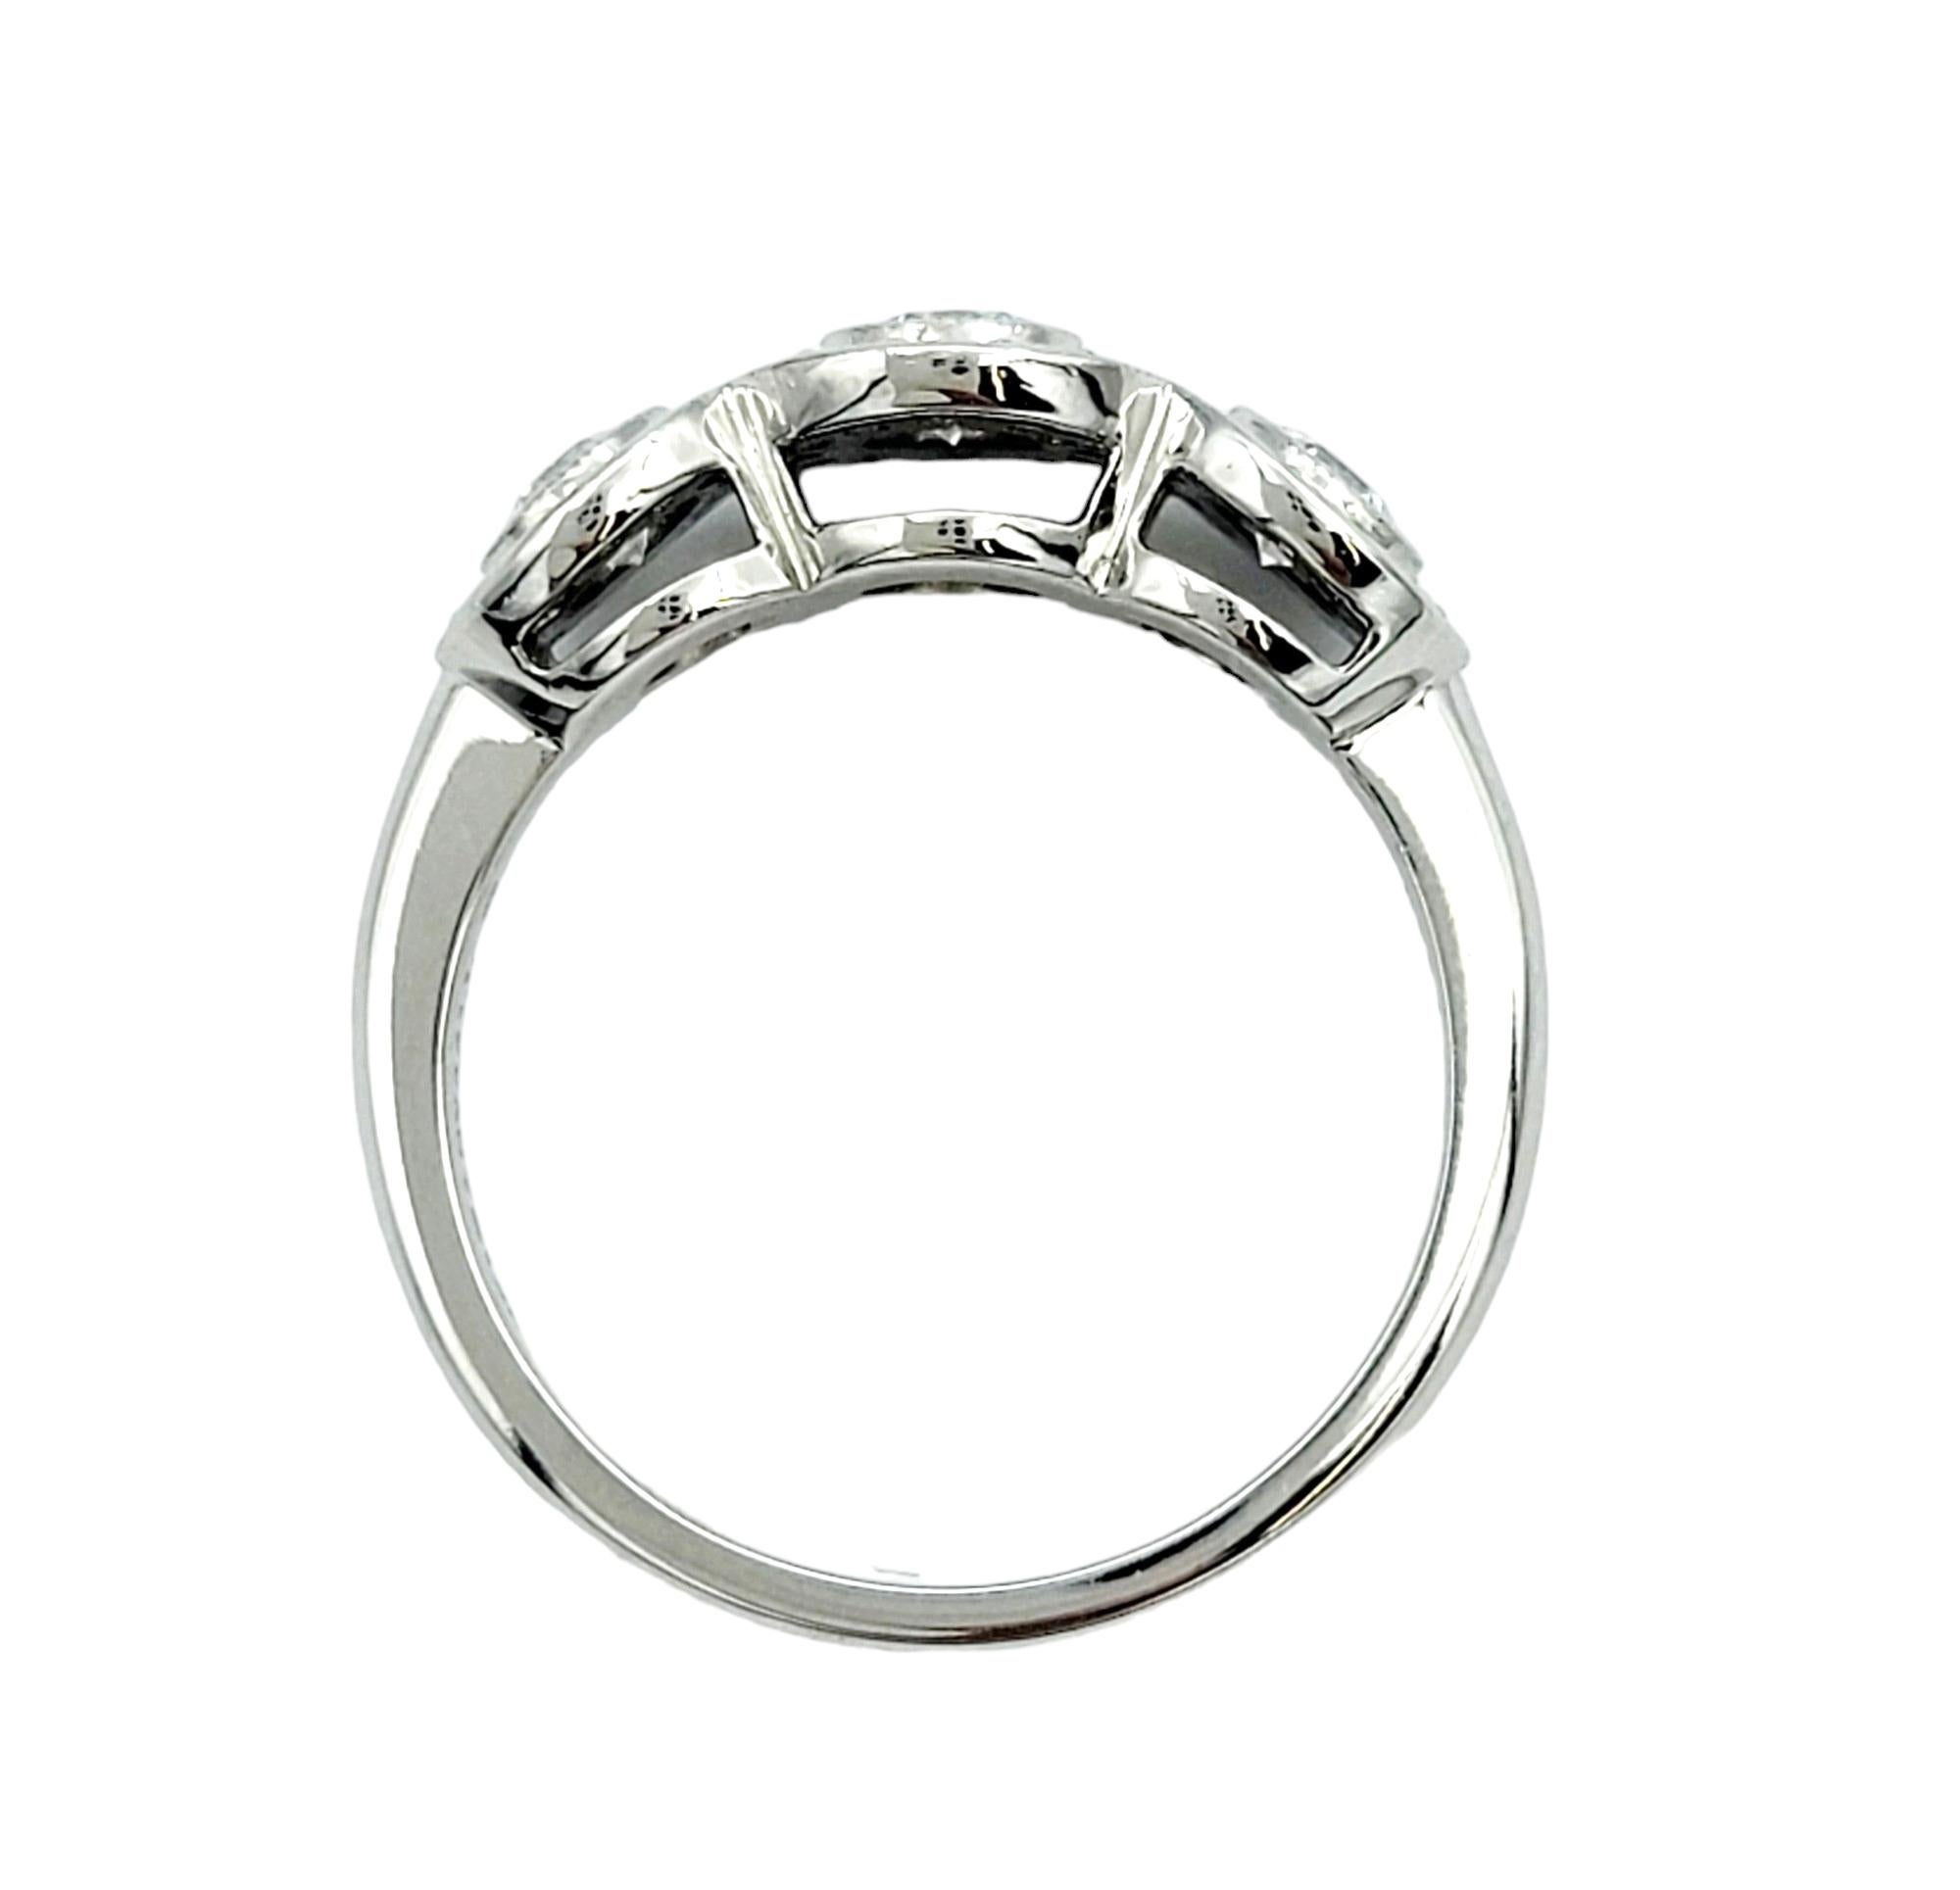 Contemporary Tiffany & Co. Three Stone Circlet Diamond Halo Ring in Platinum Size 4.75 For Sale